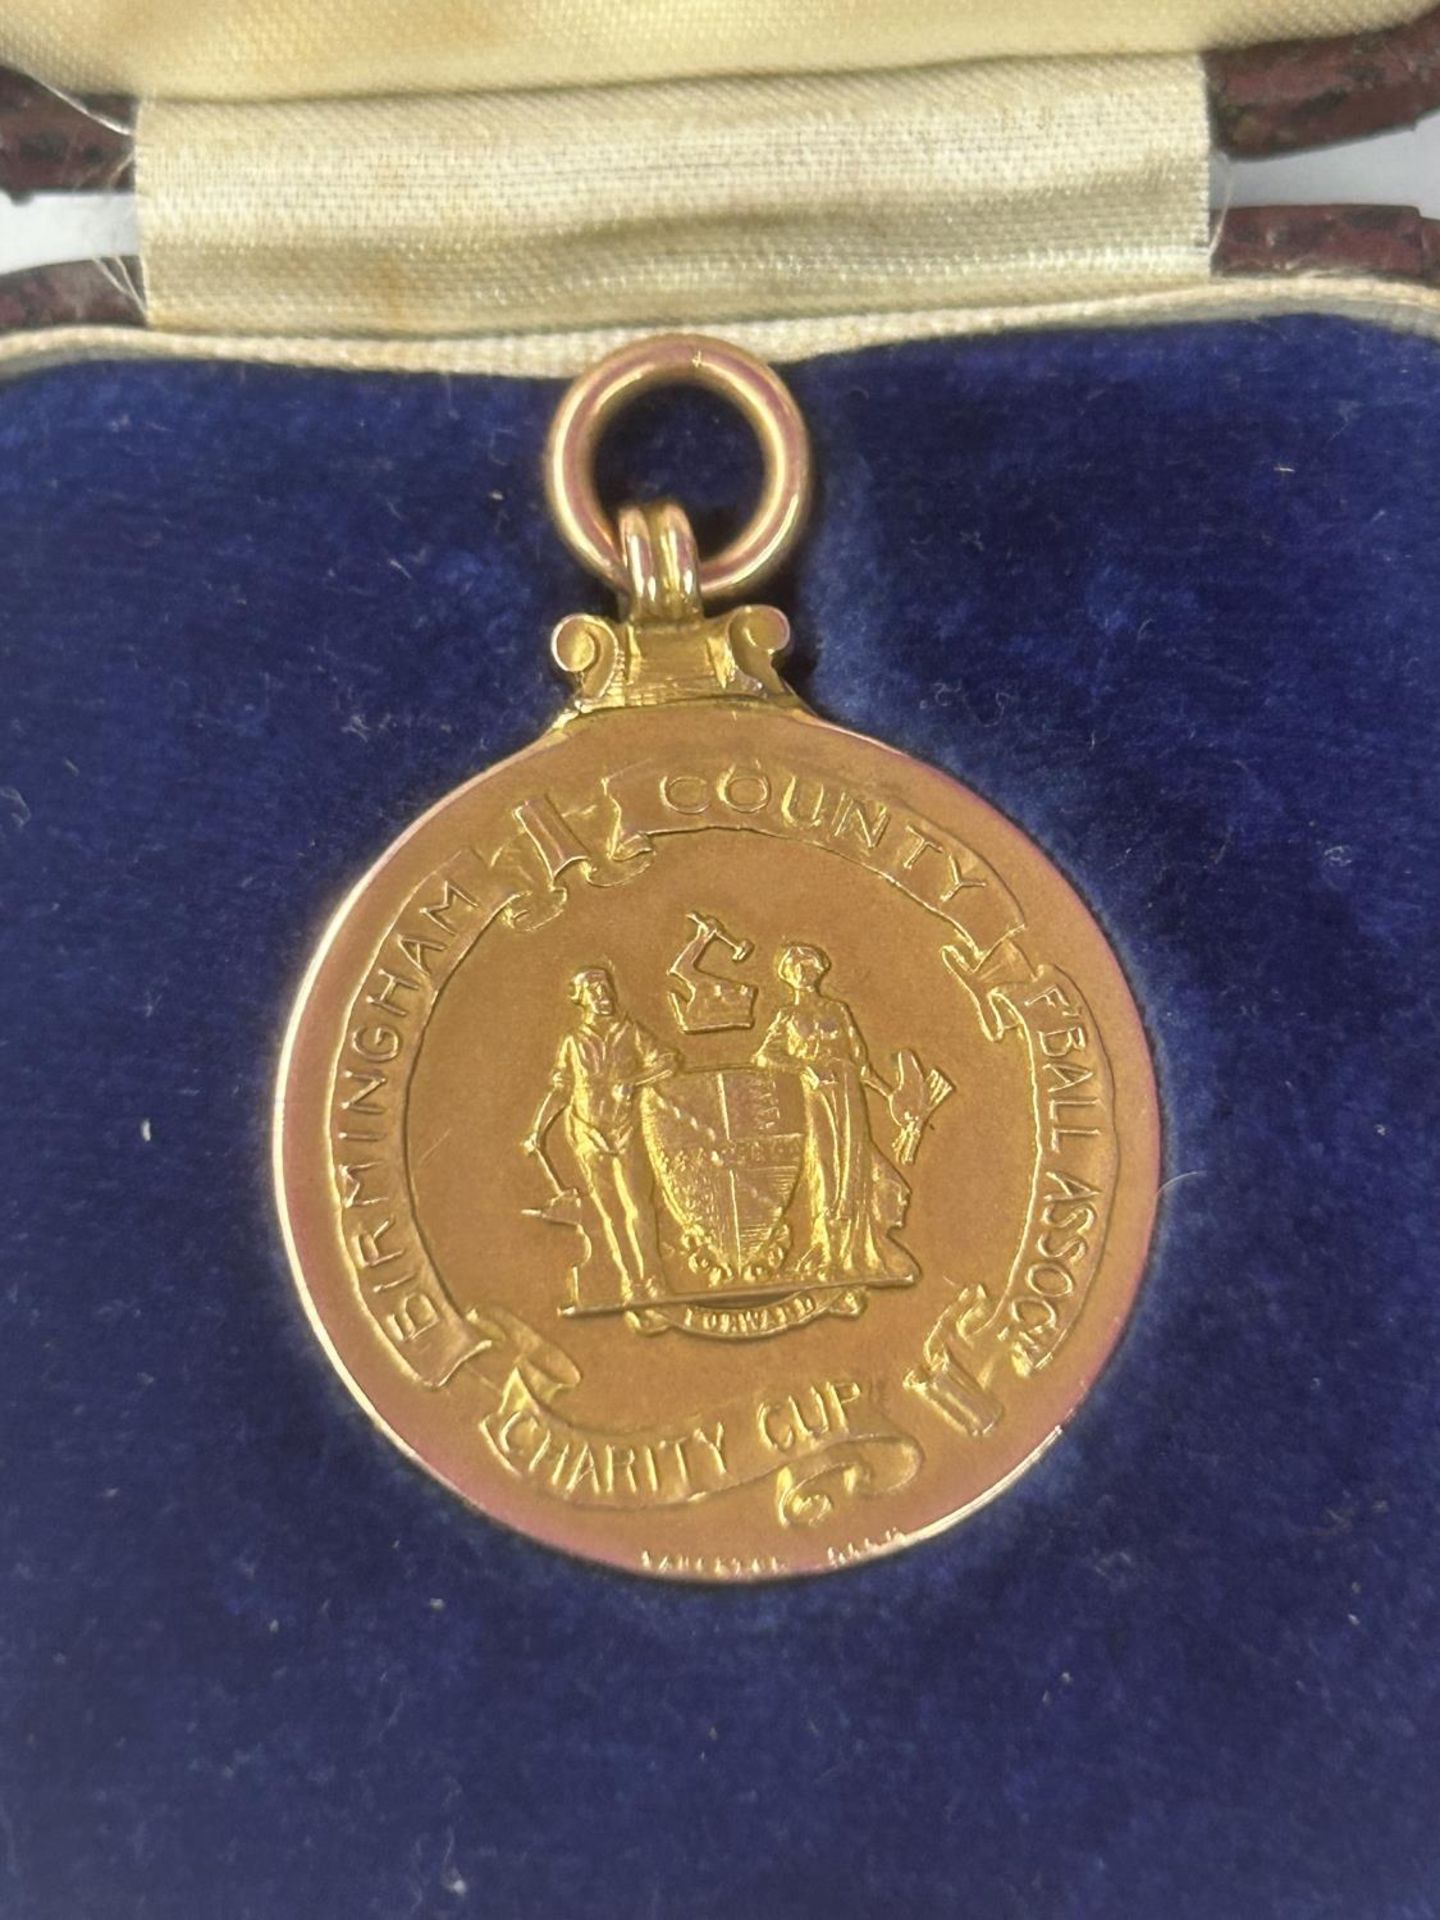 A HALLMARKED 9 CARAT GOLD BIRMINGHAM COUNTY FOOTBALL ASSOCIATION CHARITY CUP JOINT WINNERS MEDAL - Image 3 of 6